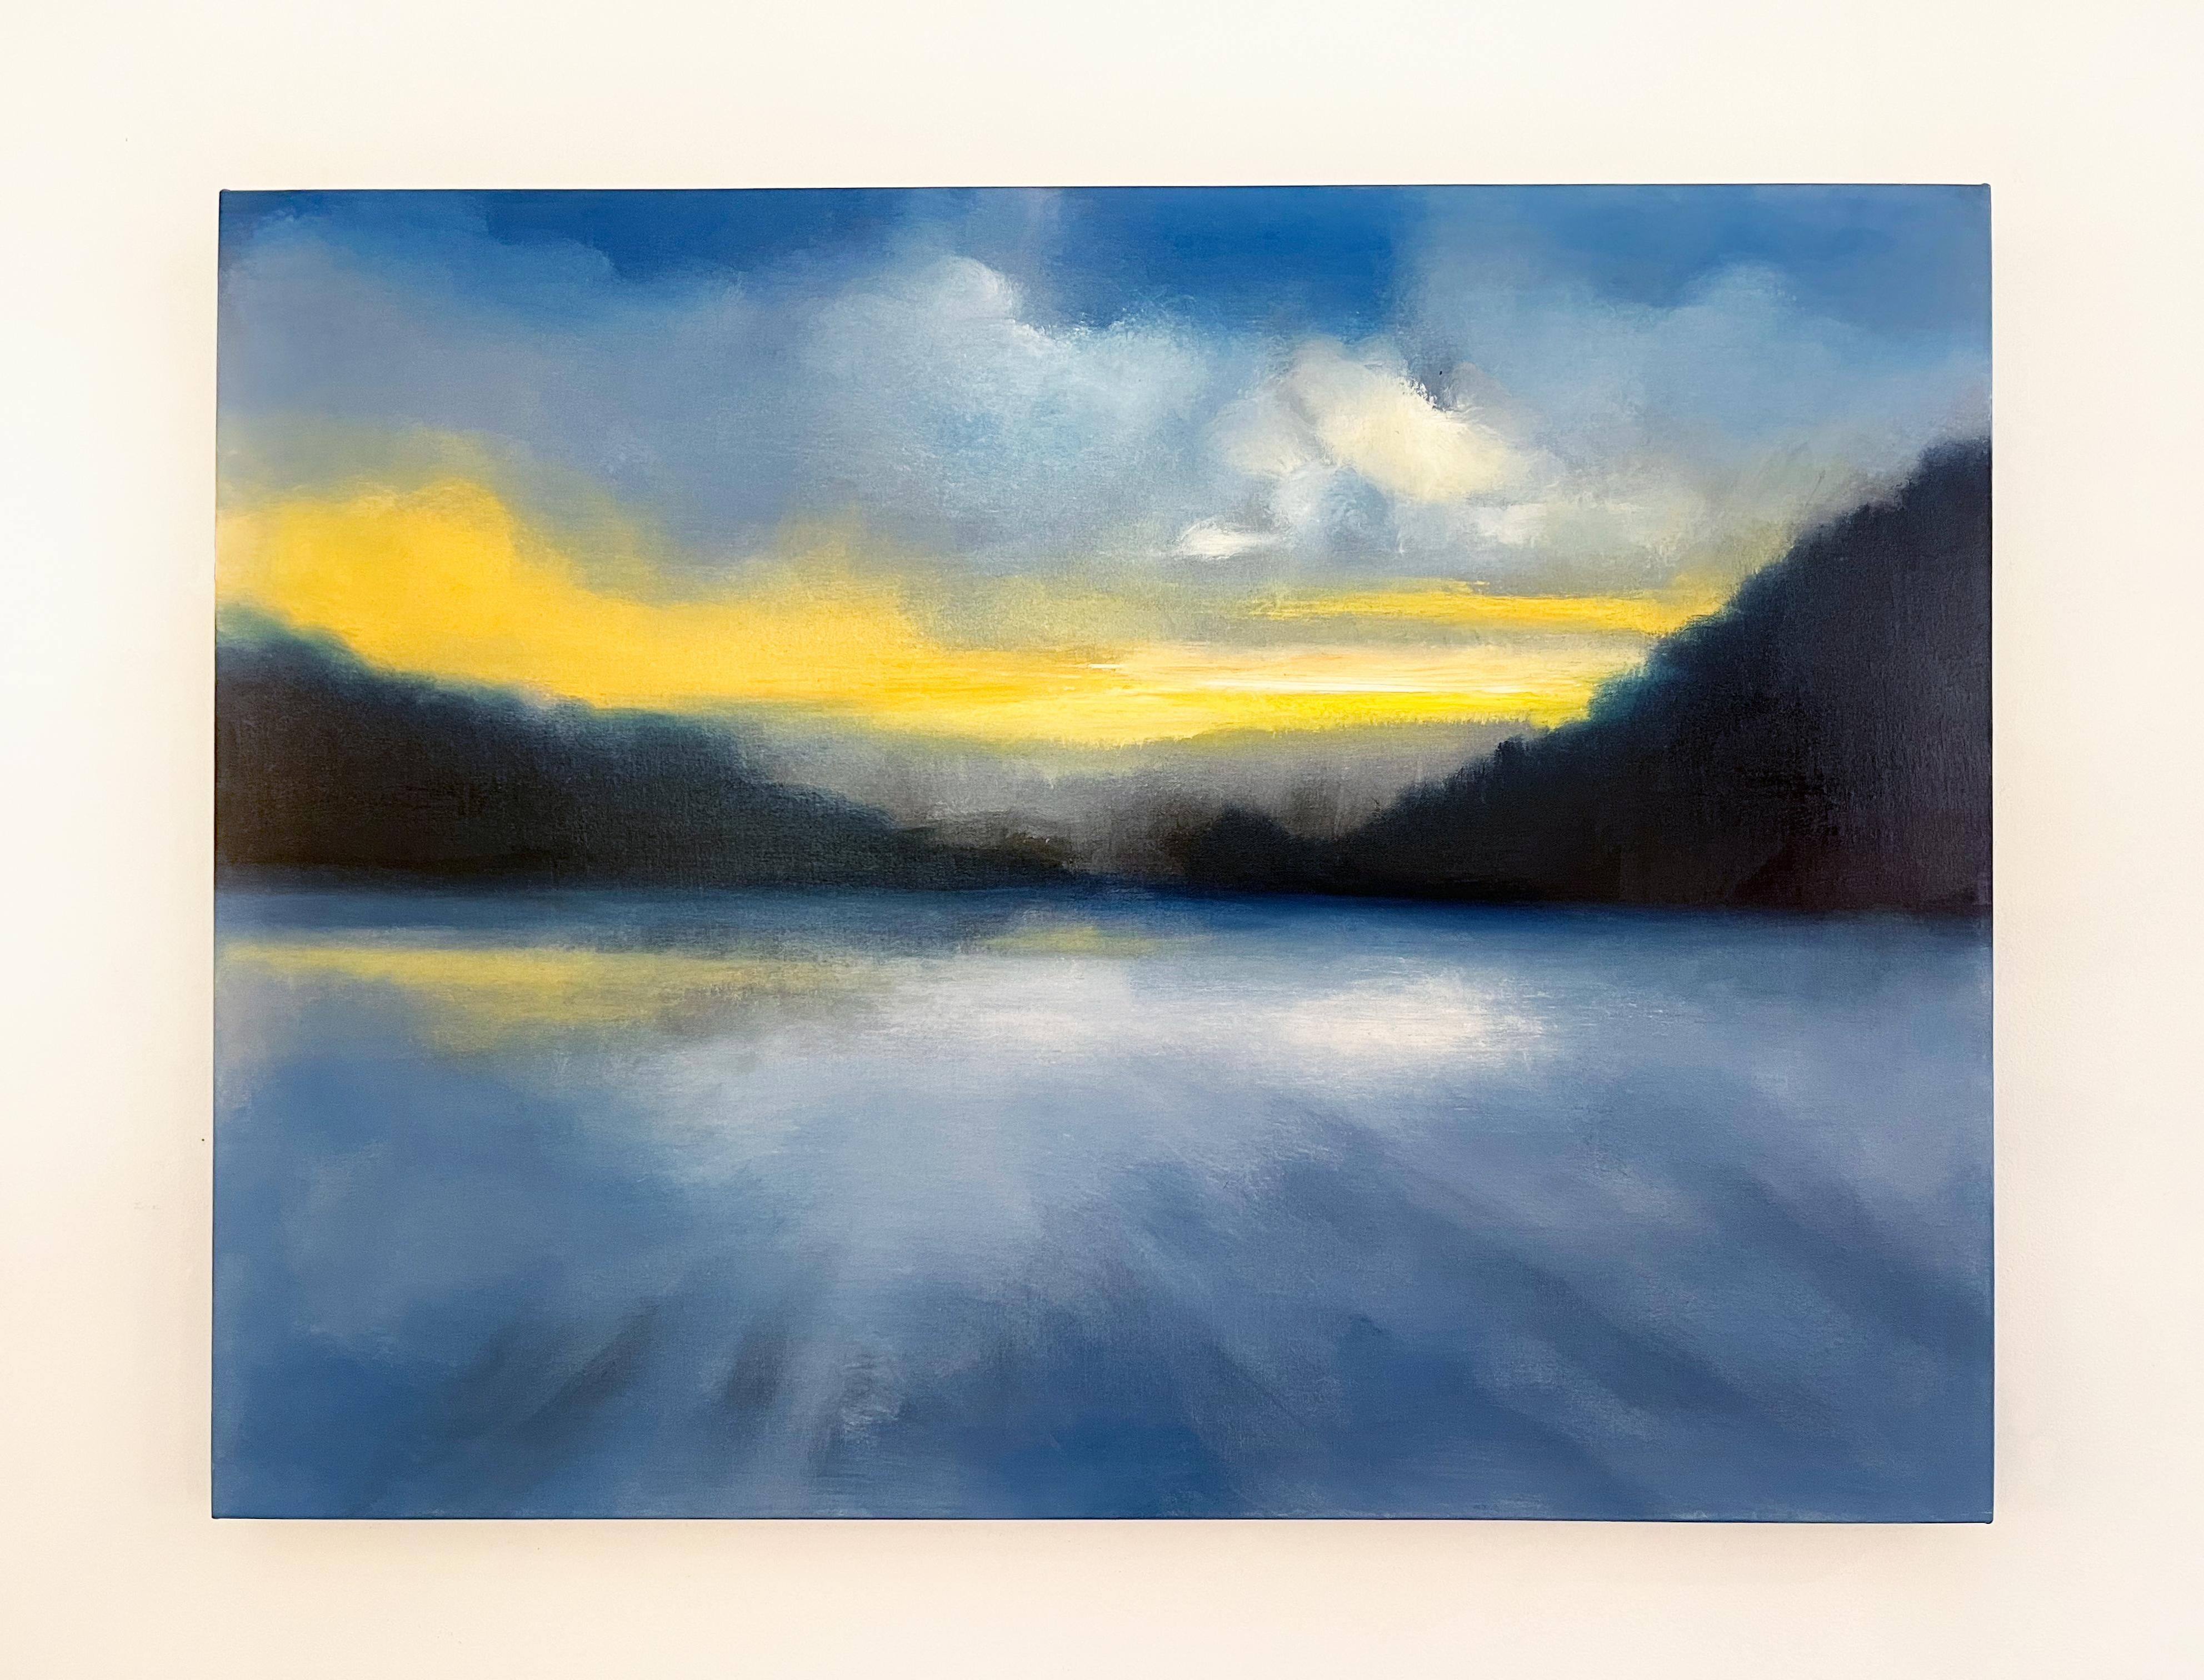 Paul chester Landscape Painting - Light in the Cloud, 30x40", serene oil landscape in blues and yellows